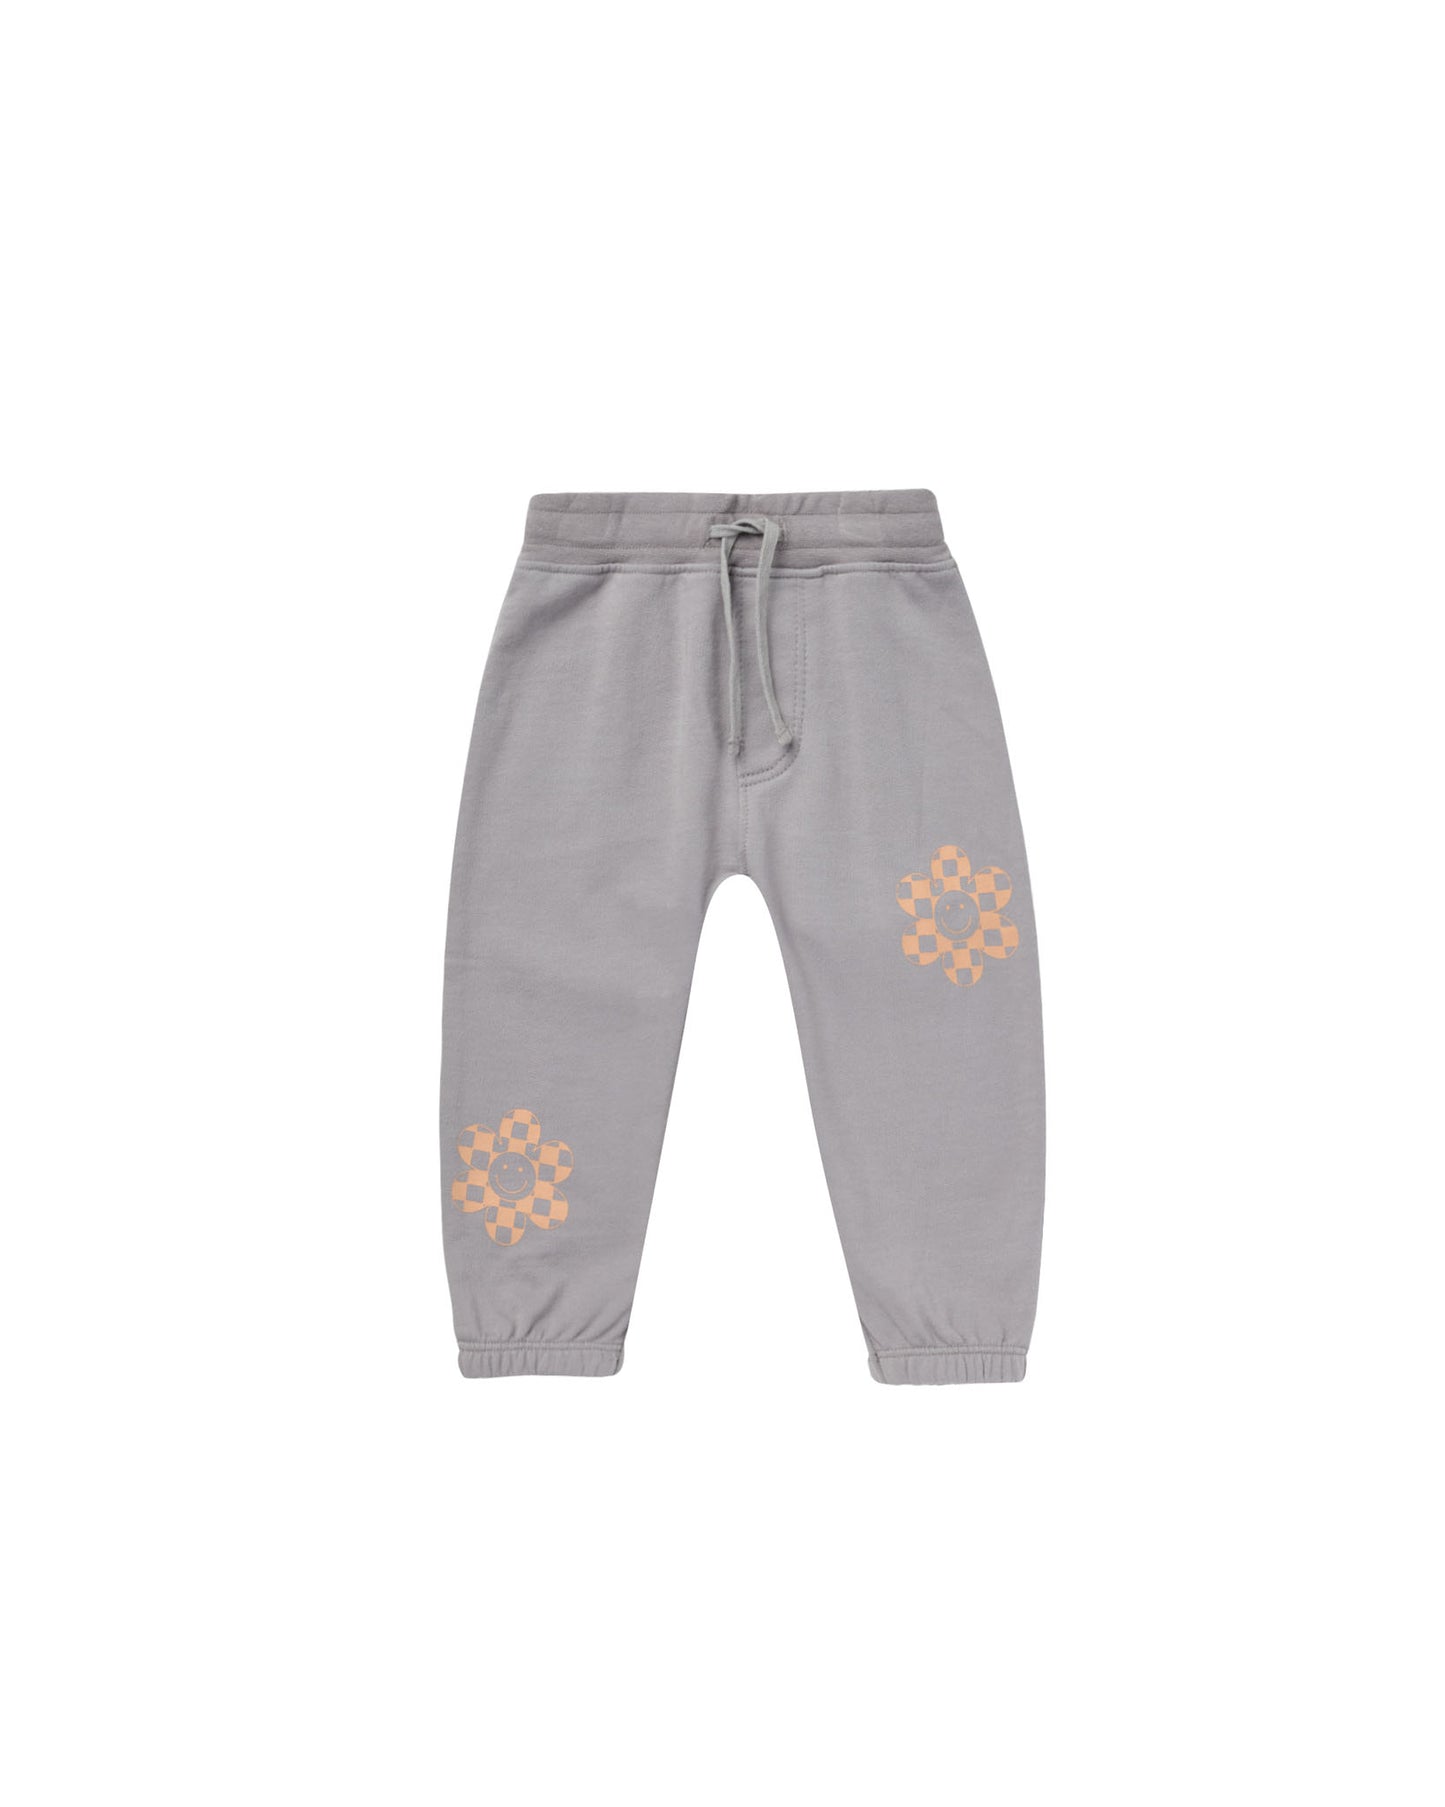 Rylee + Cru - Jogger Pant - French Blue